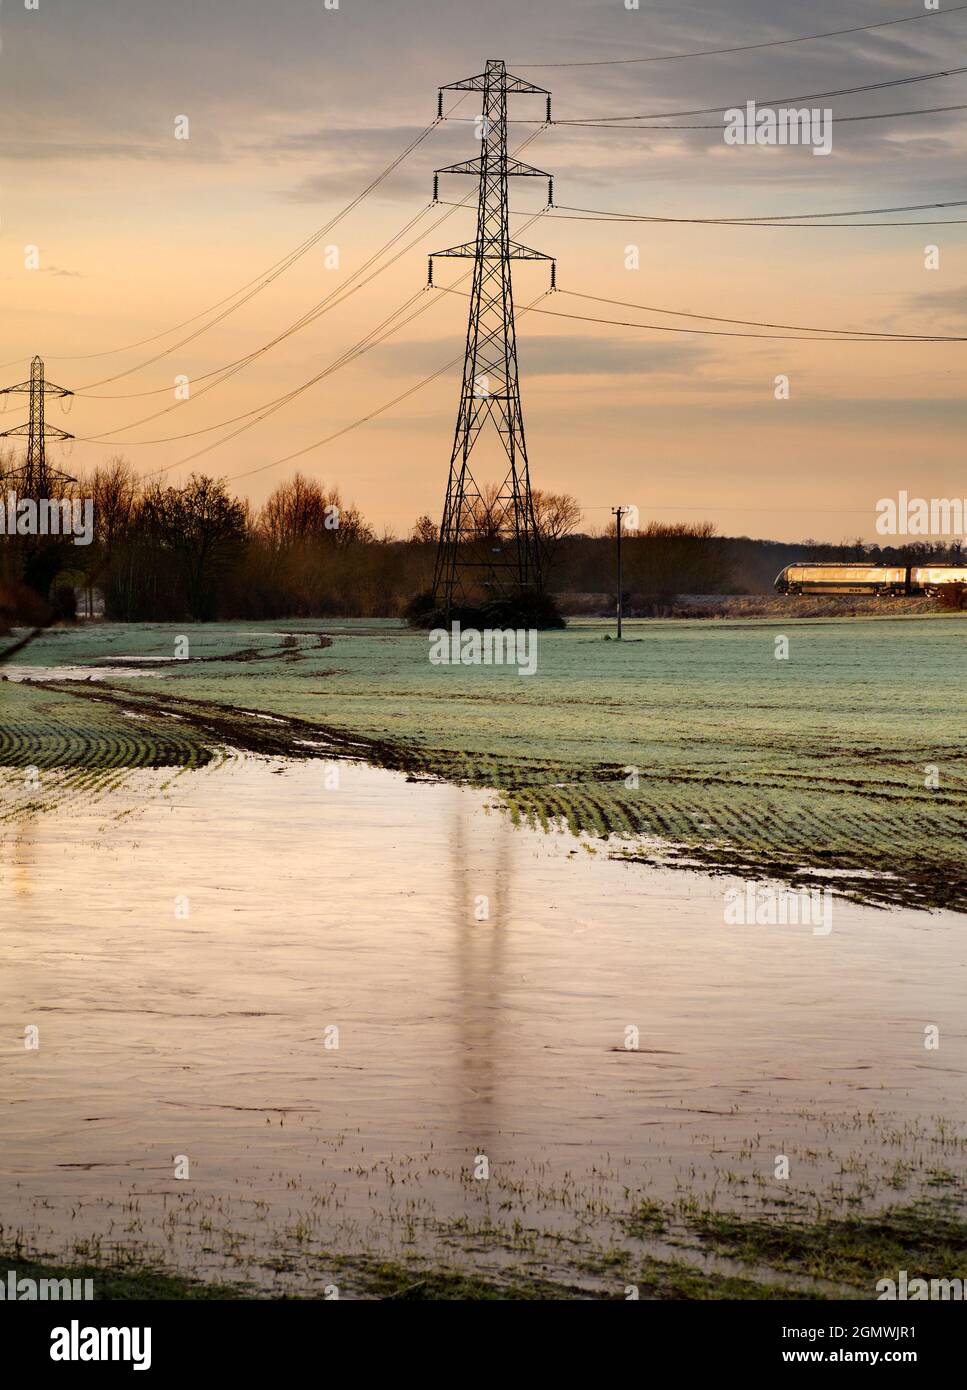 Oxfordshire, England -  30 December 2020; no people in view.    I love electricity pylons; I find their abstract, gaunt shapes endlessly fascinating. Stock Photo